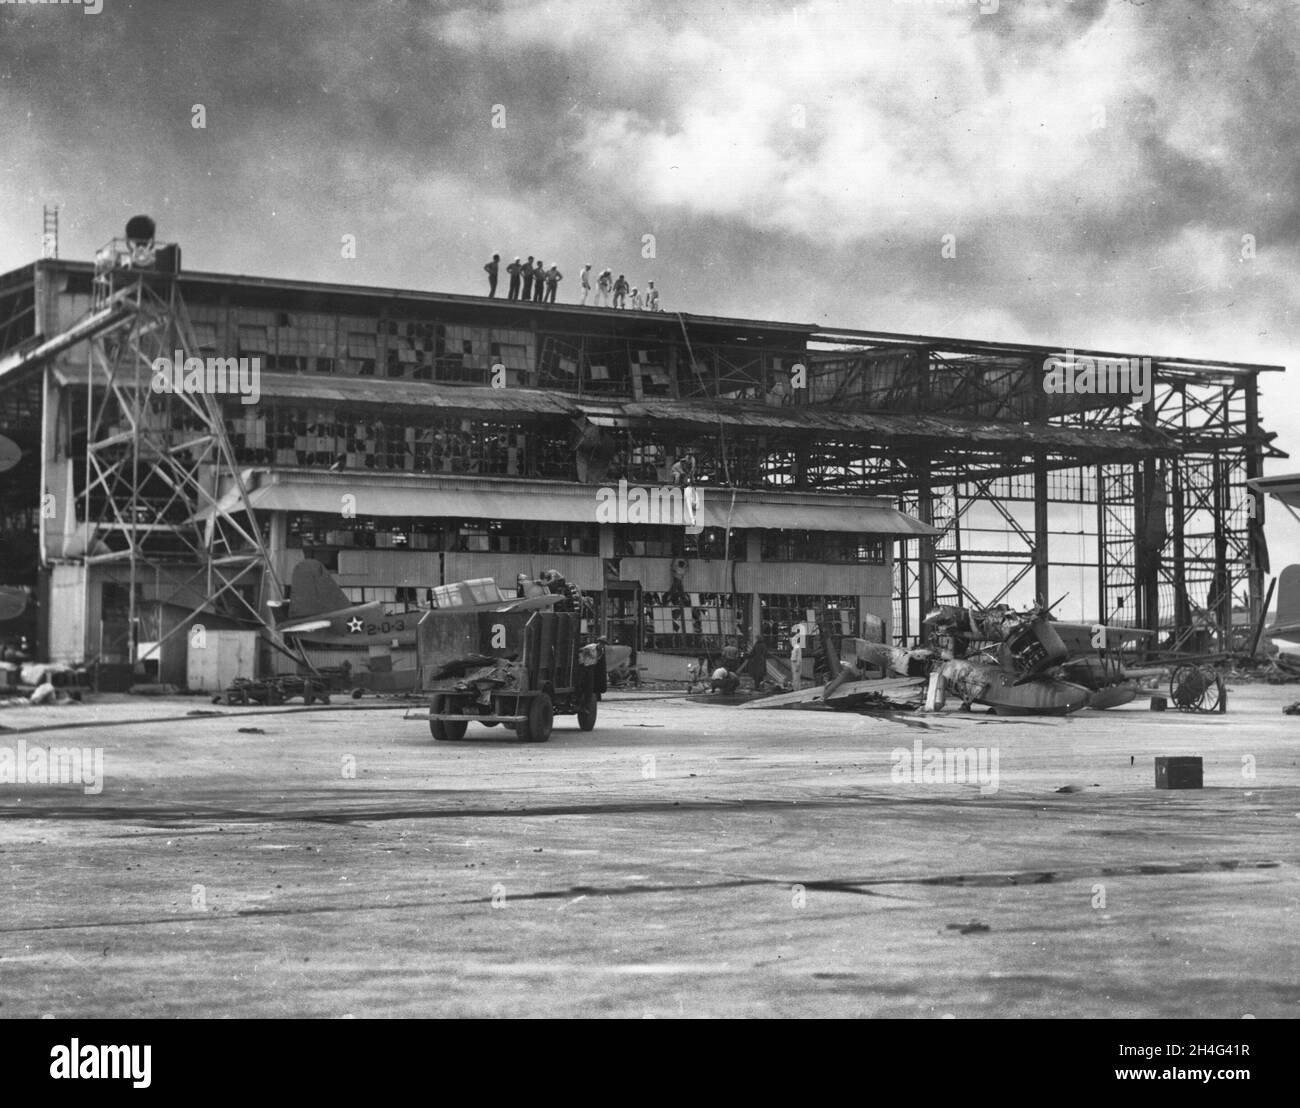 Photograph of Planes and Hangars Wrecked in the Japanese Attack on Pearl Harbor Stock Photo